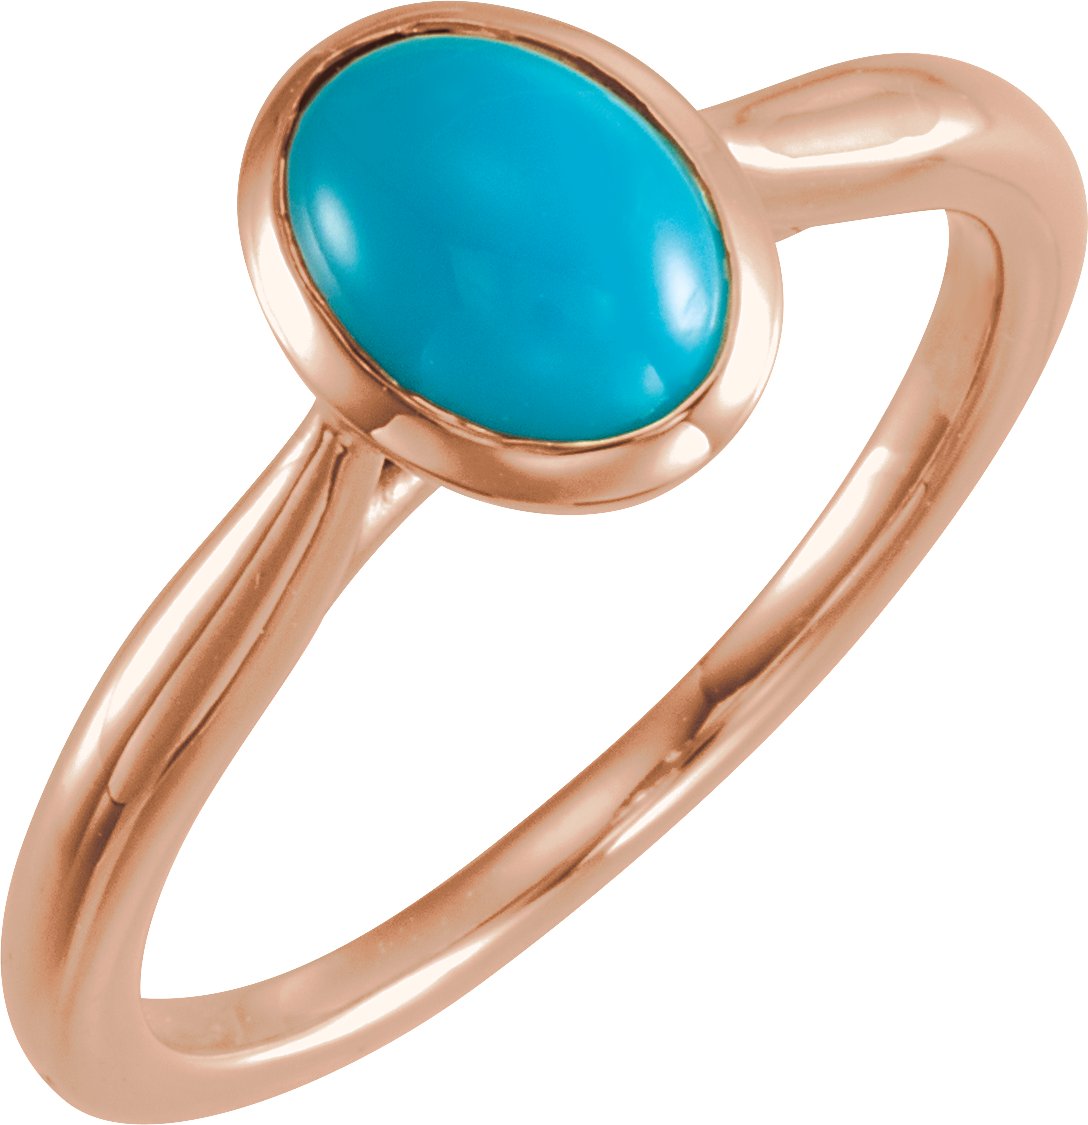 14K Rose 8x6 mm Oval Cabochon Turquoise Ring